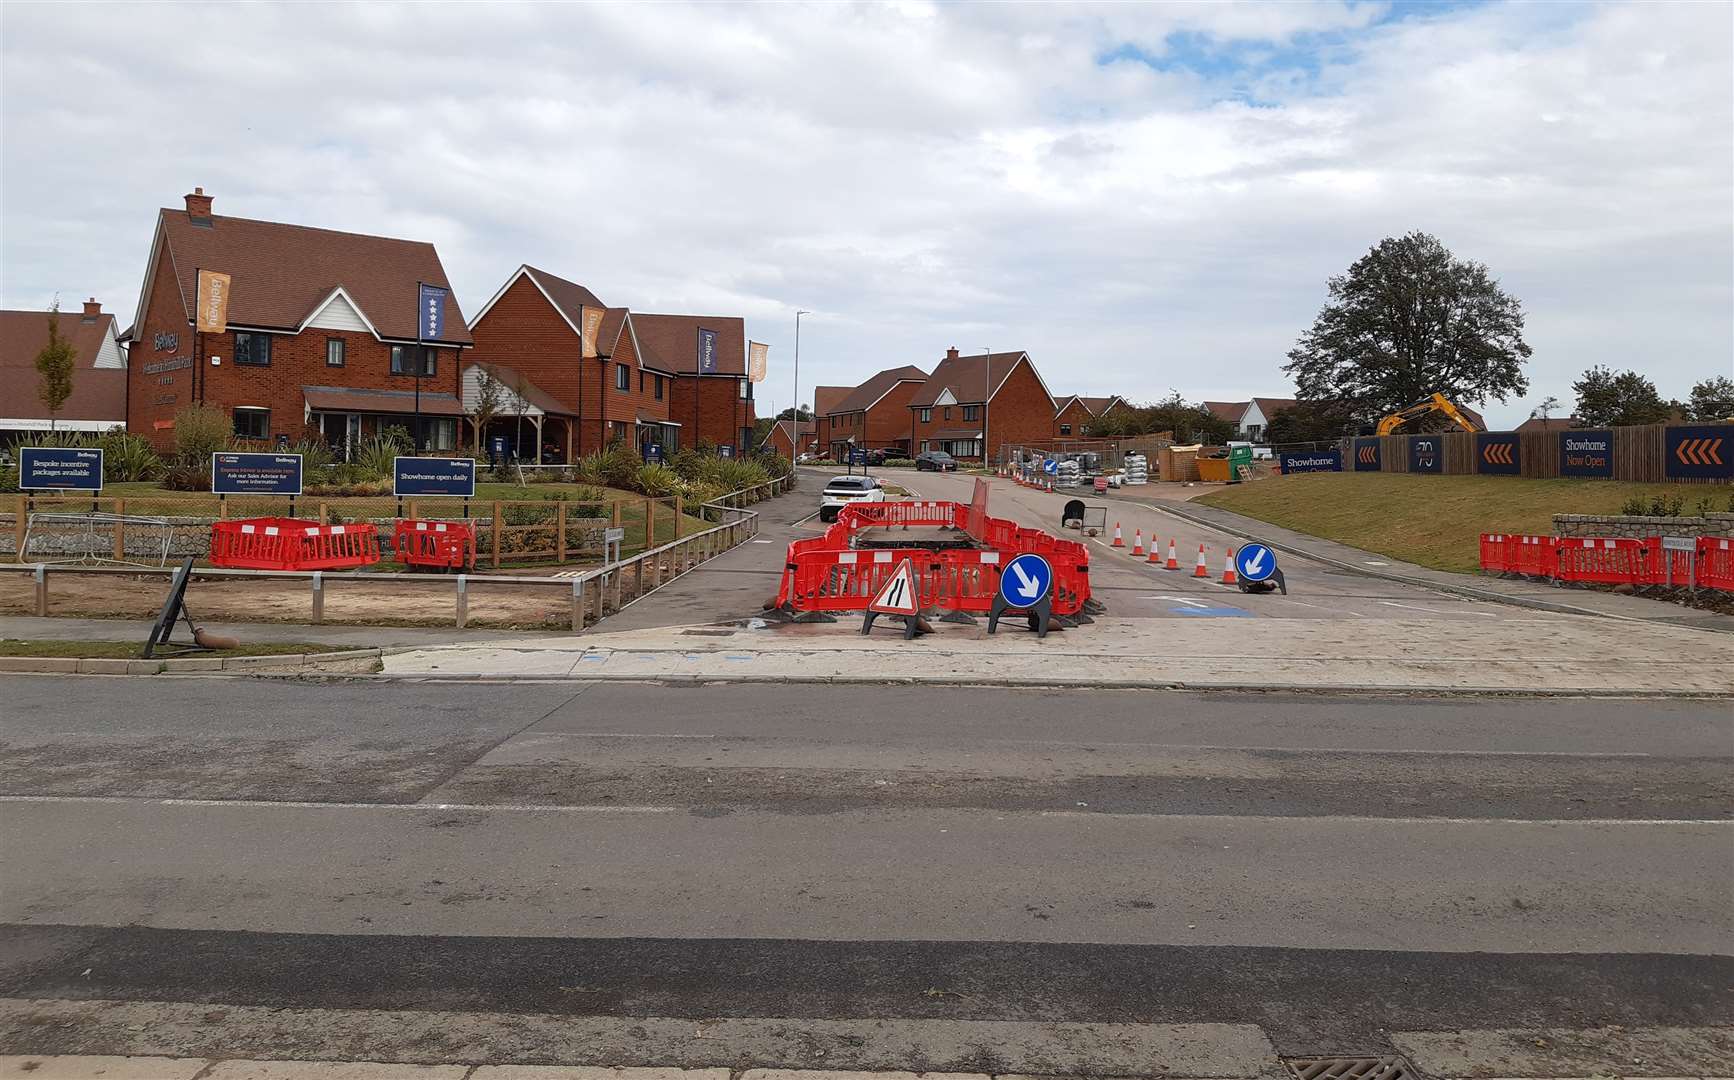 The traffic lights will be installed at the junction of the A20 and Honeysuckle Avenue